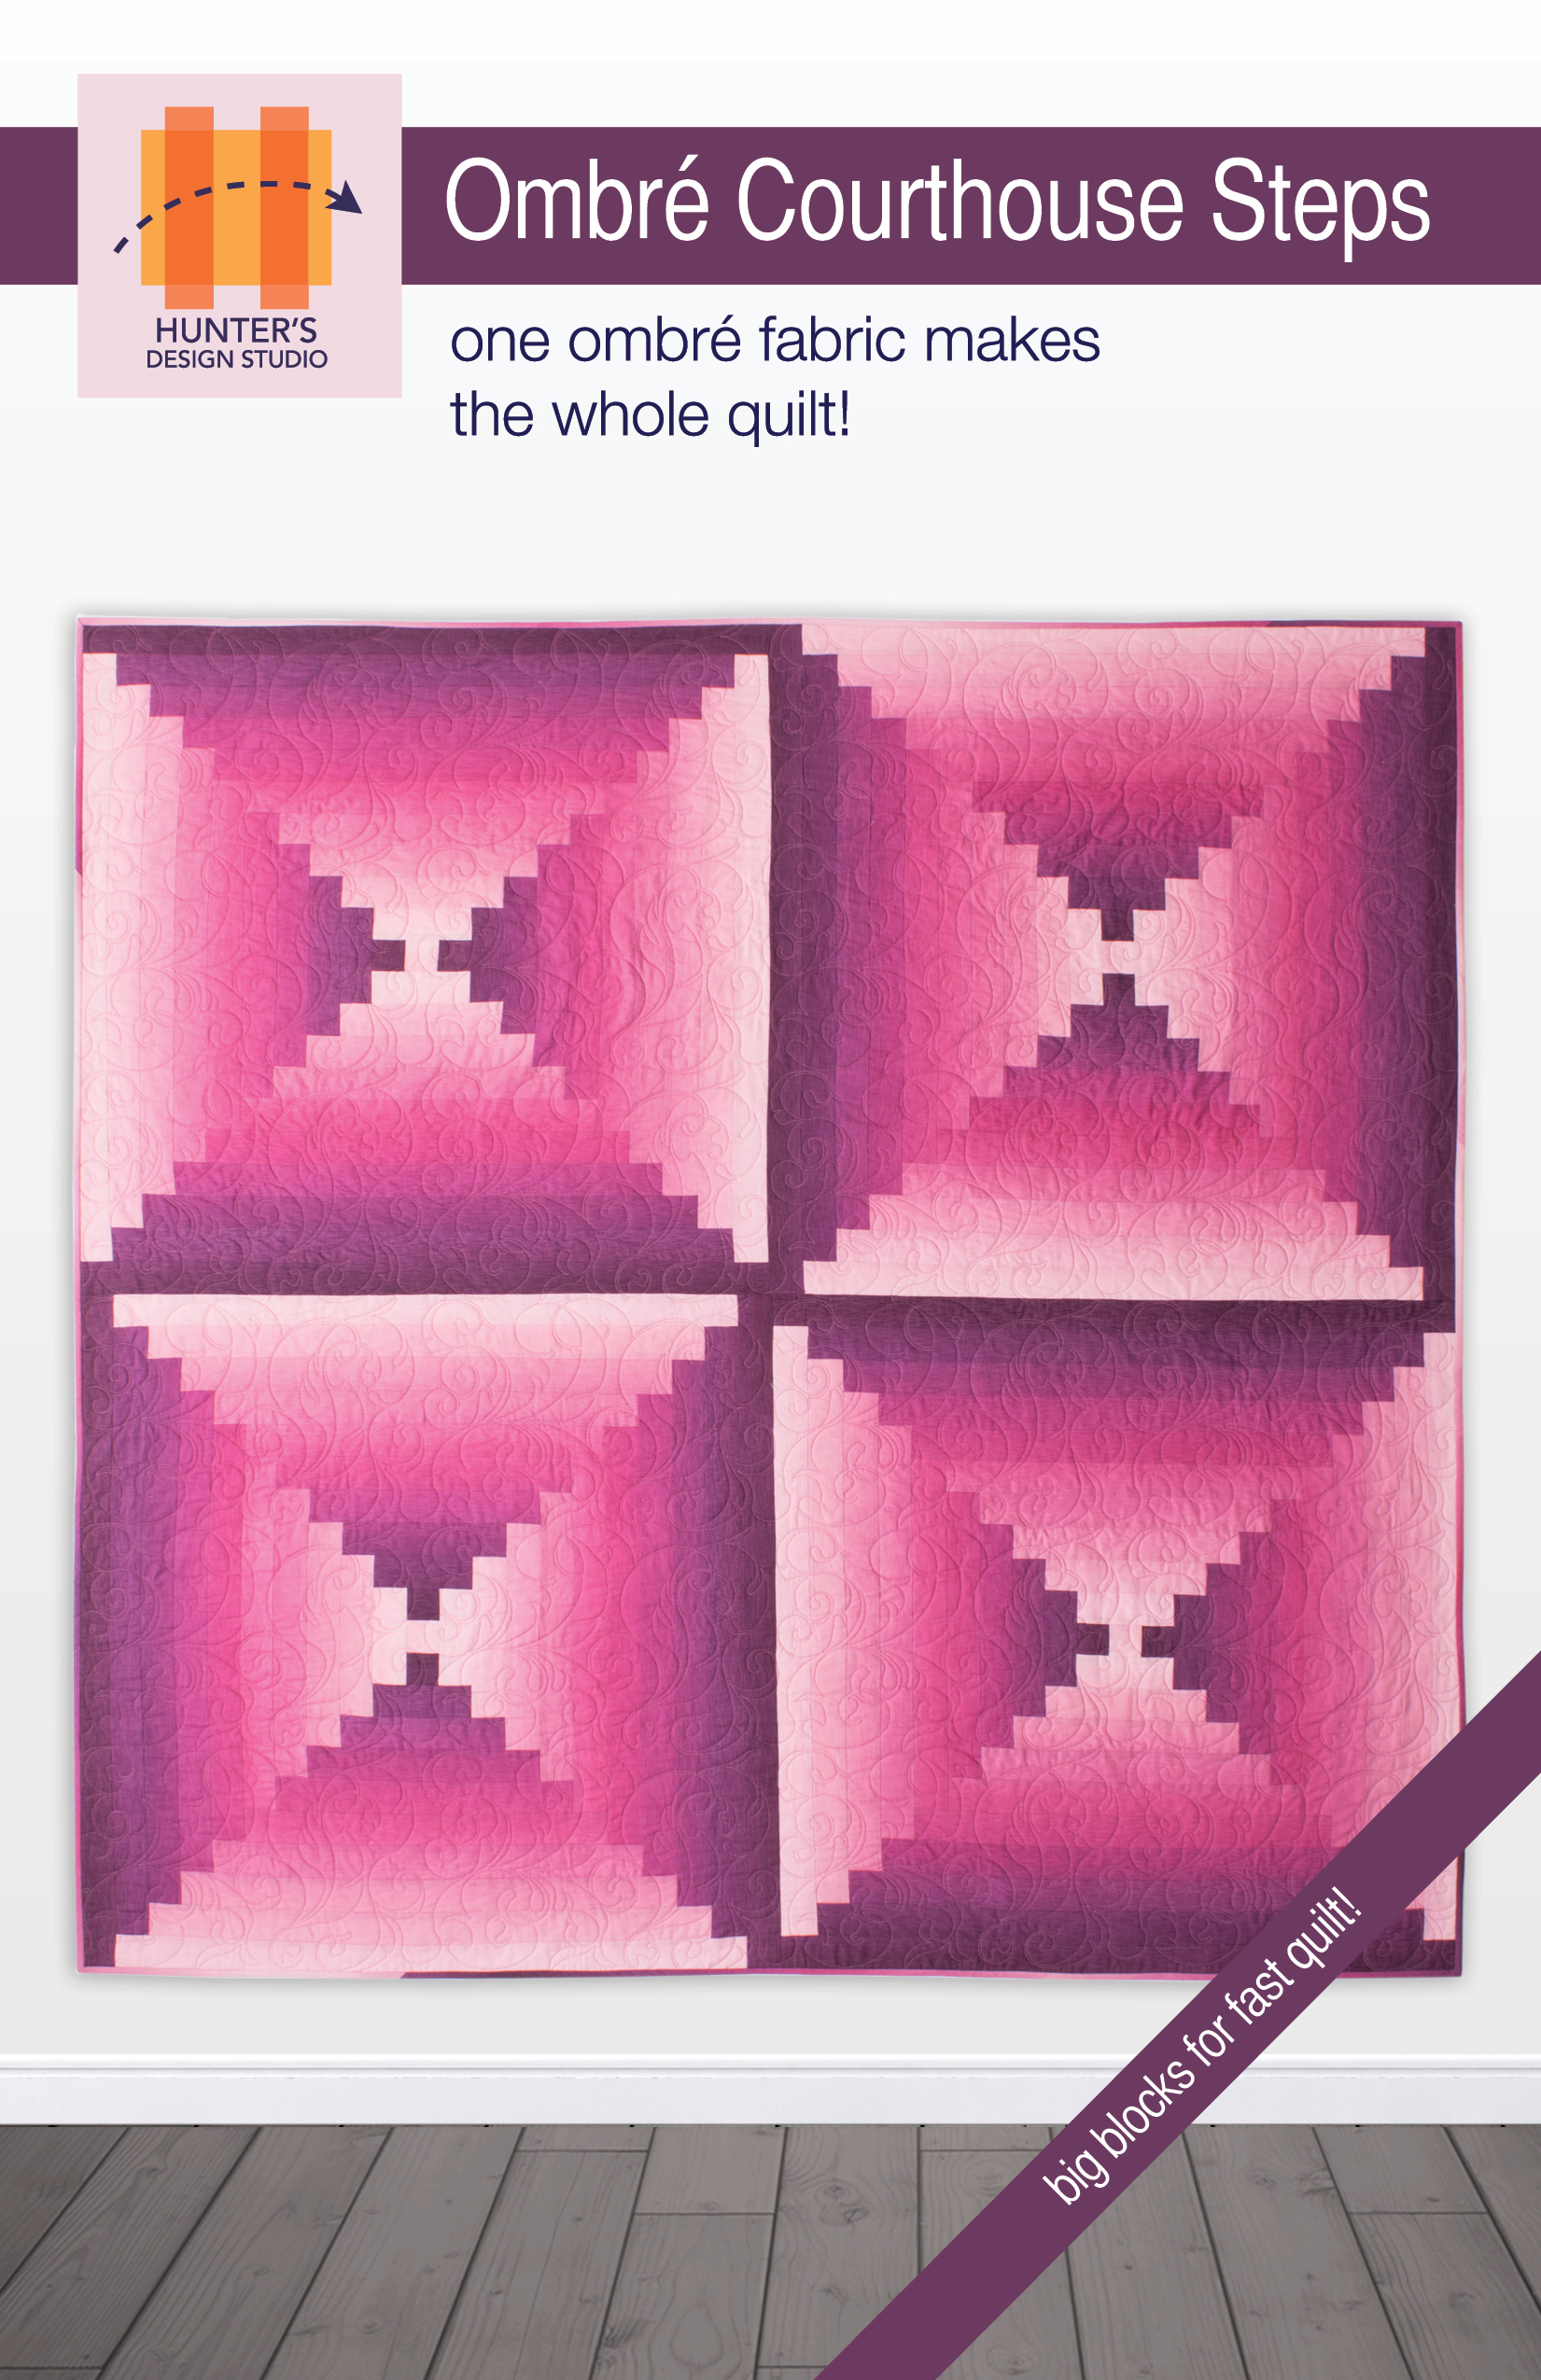 Ombré Courthouse Steps feature four Courthouse Steps block arranged in a four patch. The Ombre fabric used in the construction make the quilt glow.